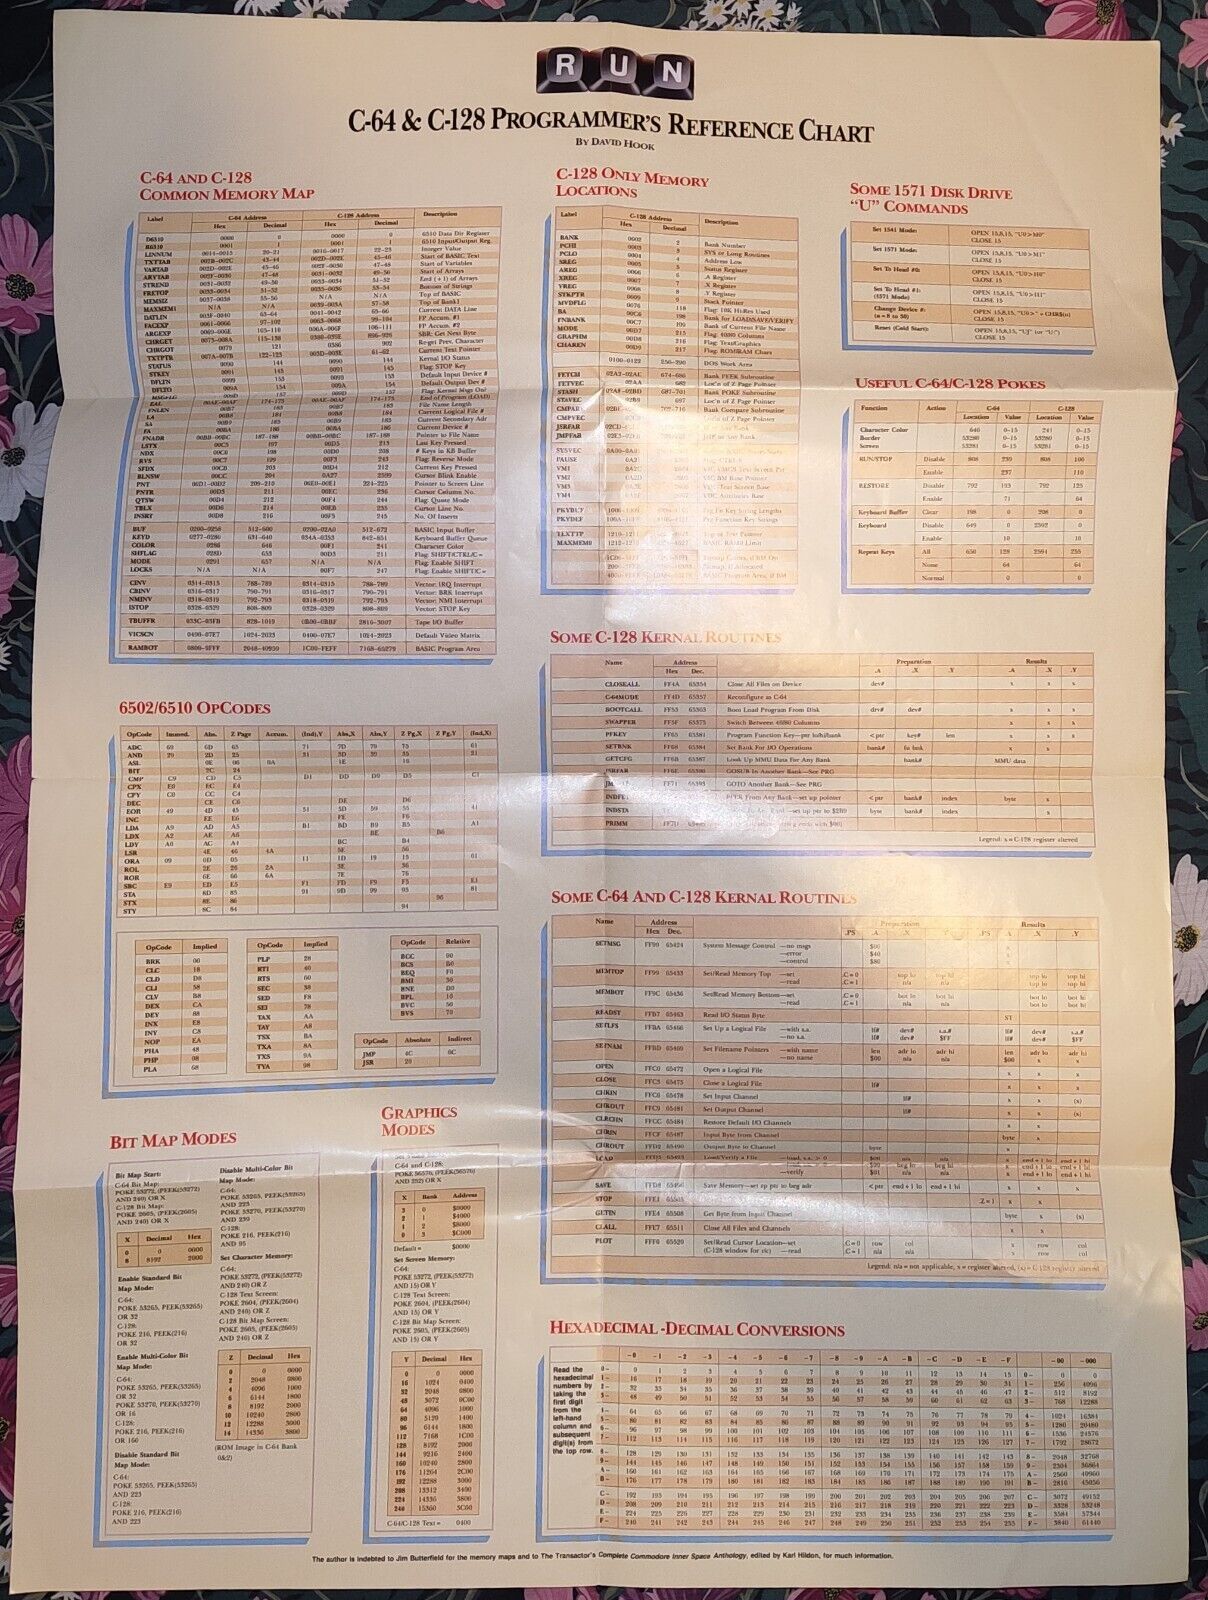 Vintage RUN Commodore C-64 & C-128 Programmers Reference Chart May Be Rare